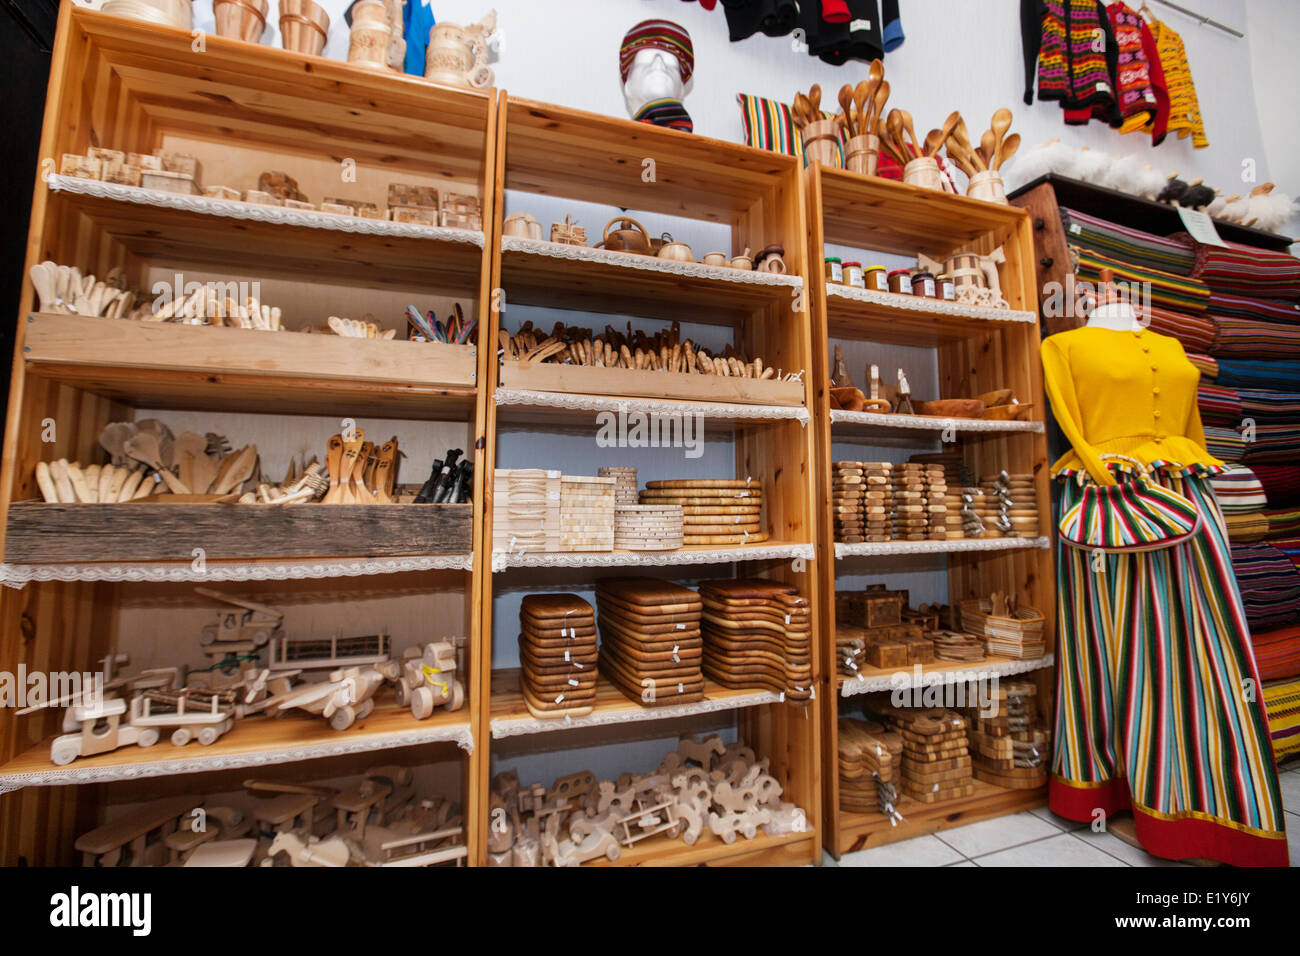 Wooden handicrafts displayed on shelves in gift store Stock Photo